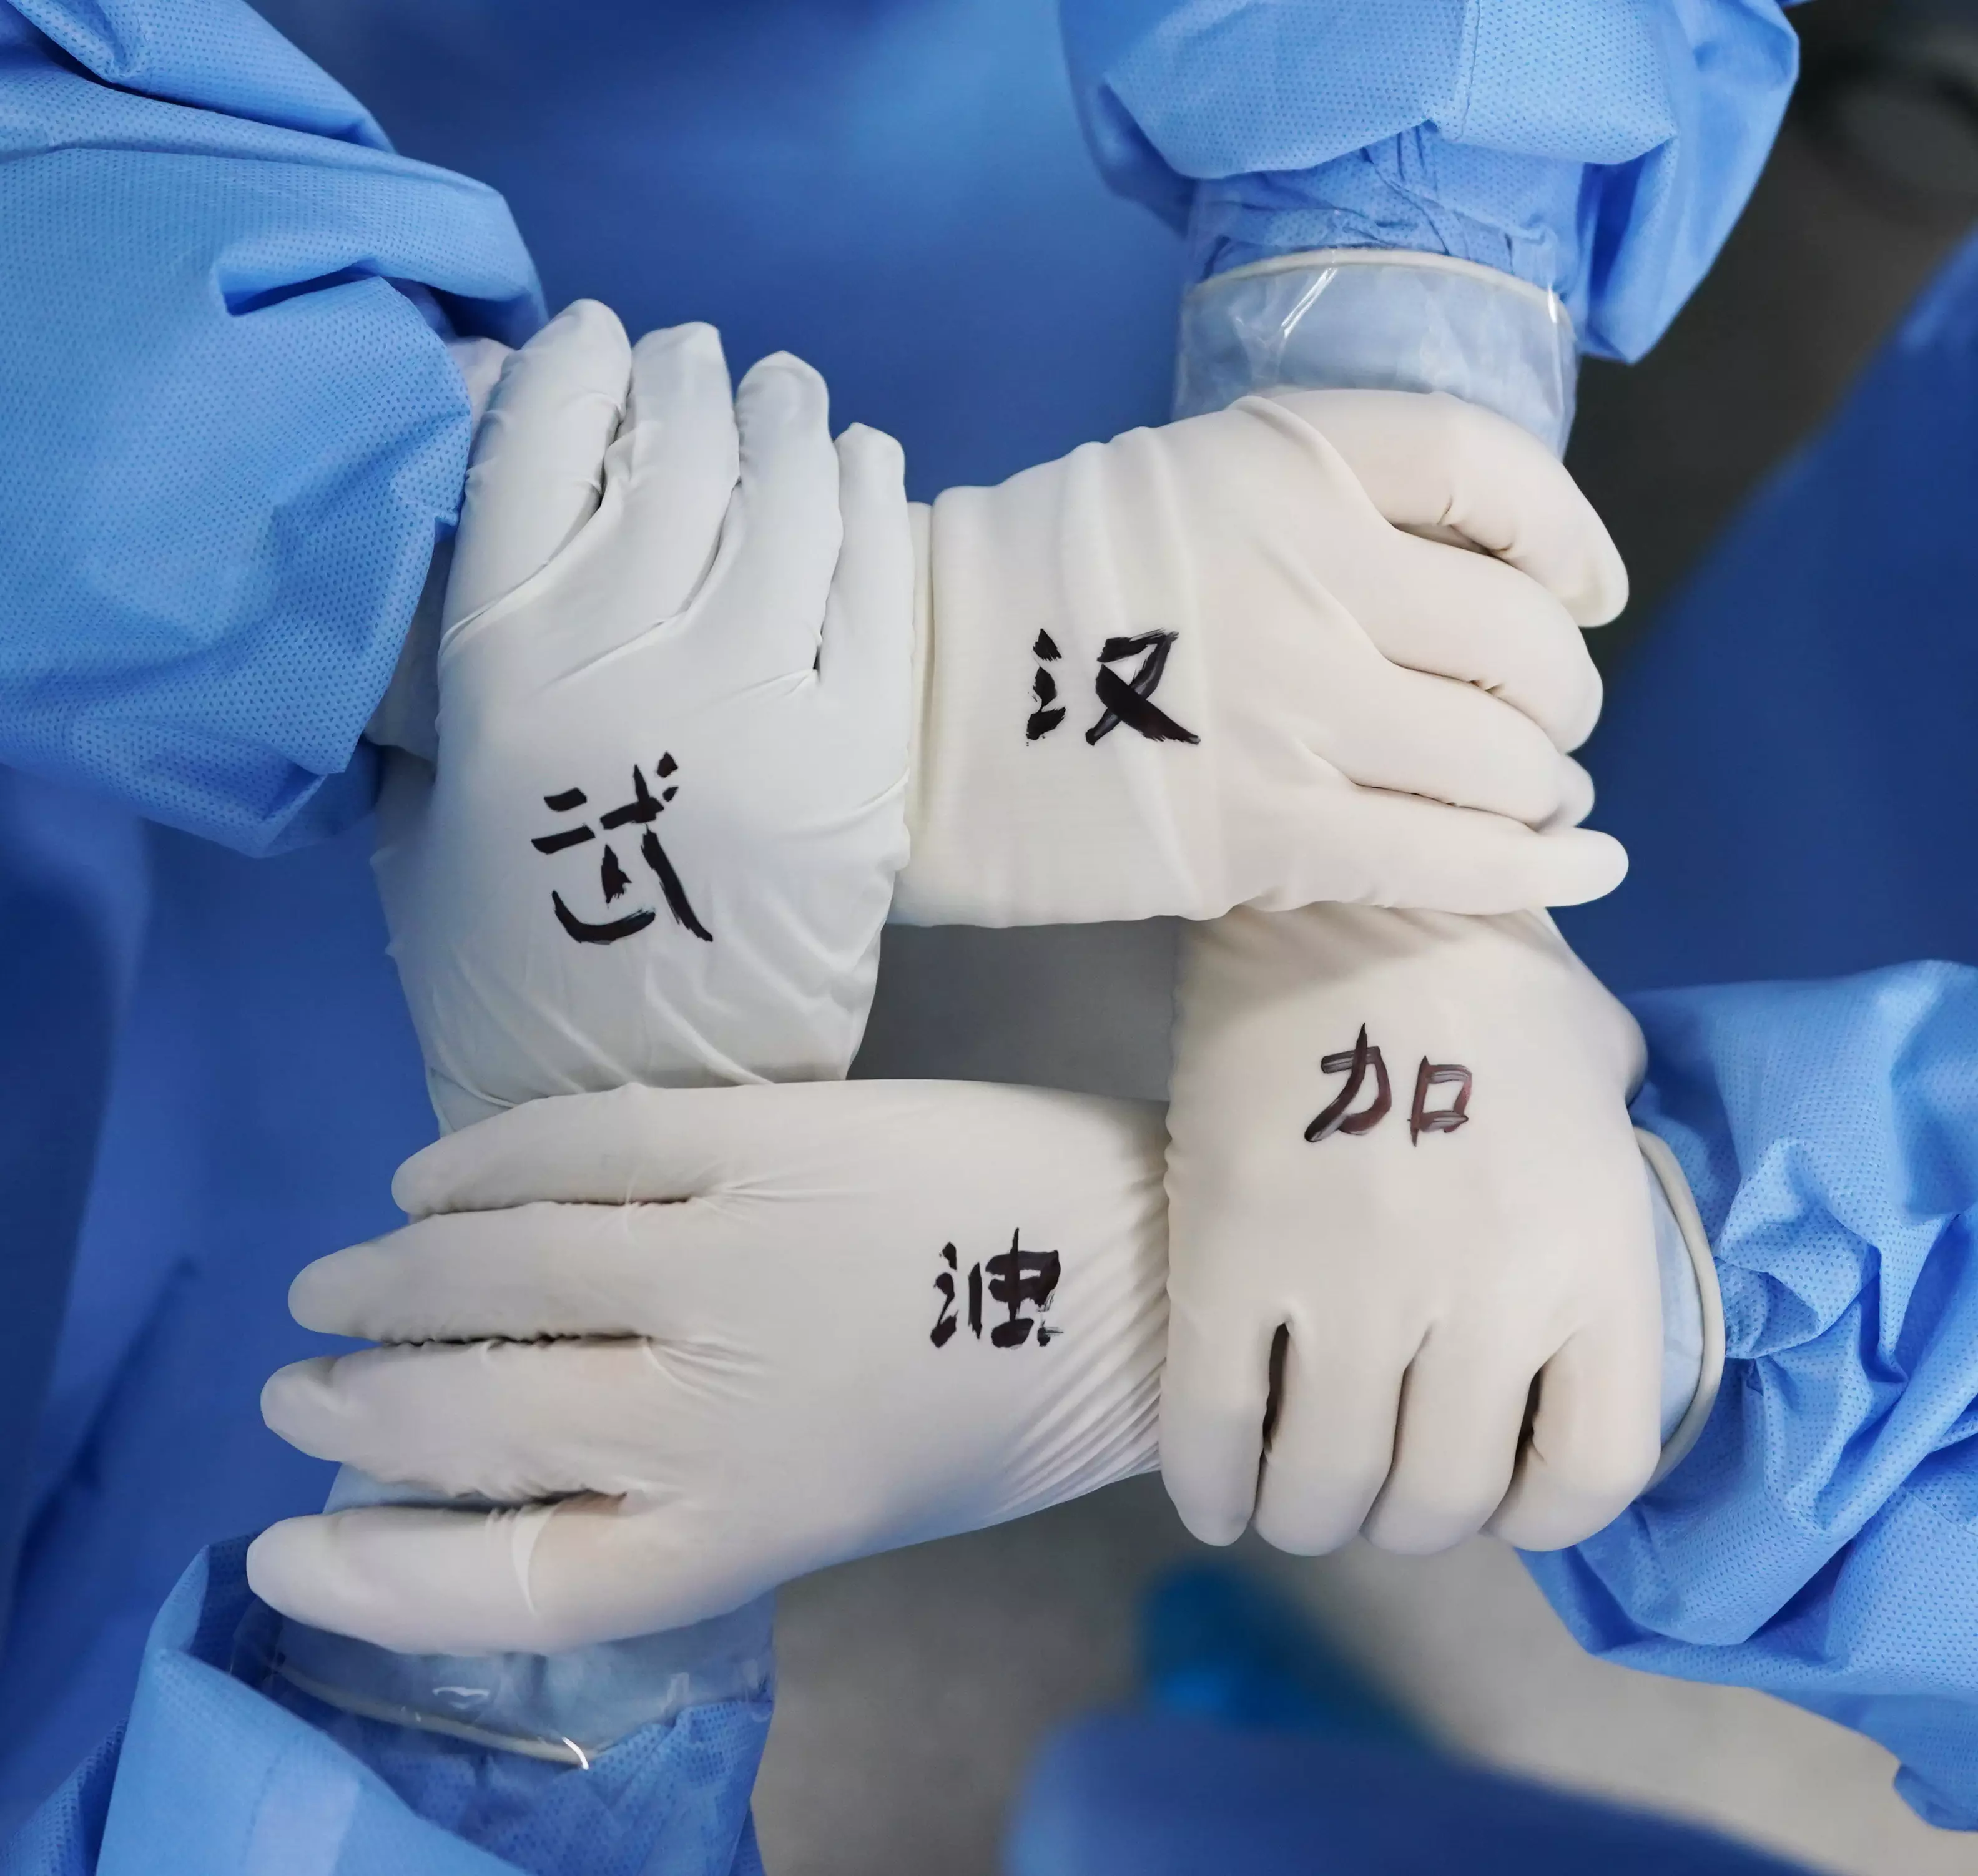 Nurses holding hands in surgical gloves with 'cheer up Wuhan' written on them.